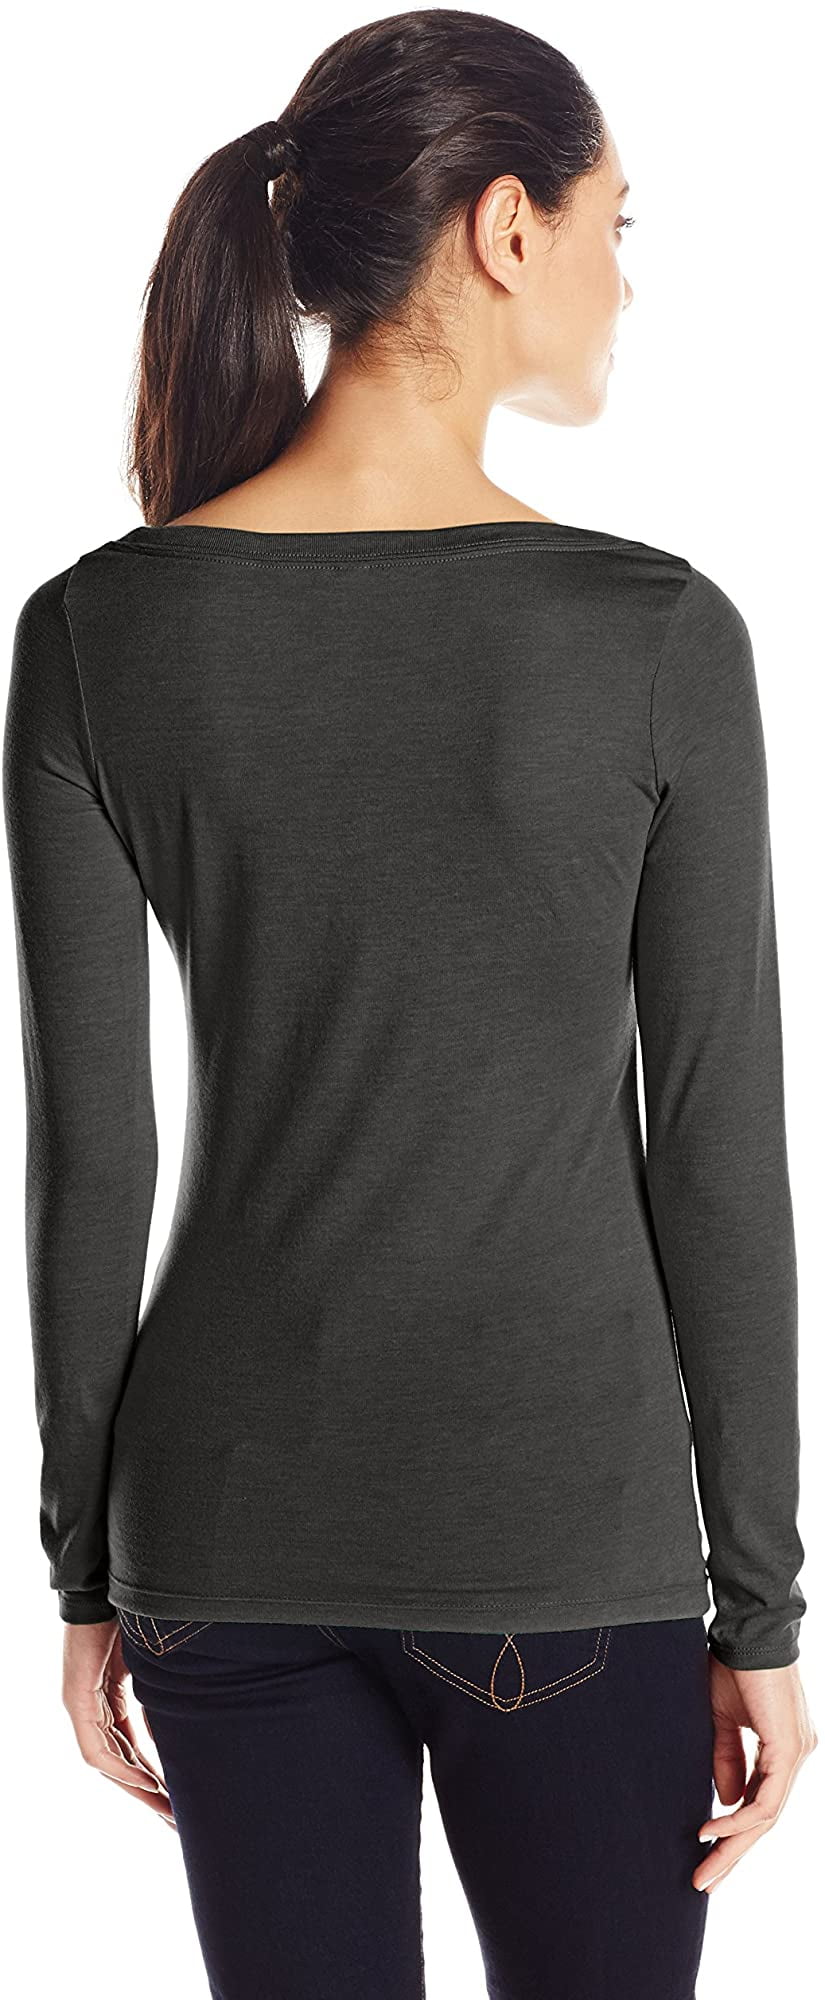 Clementine Apparel Long Sleeve T Shirts Easy Tag Scoop Neck Triblend Stretch Undershirts Tees 6731